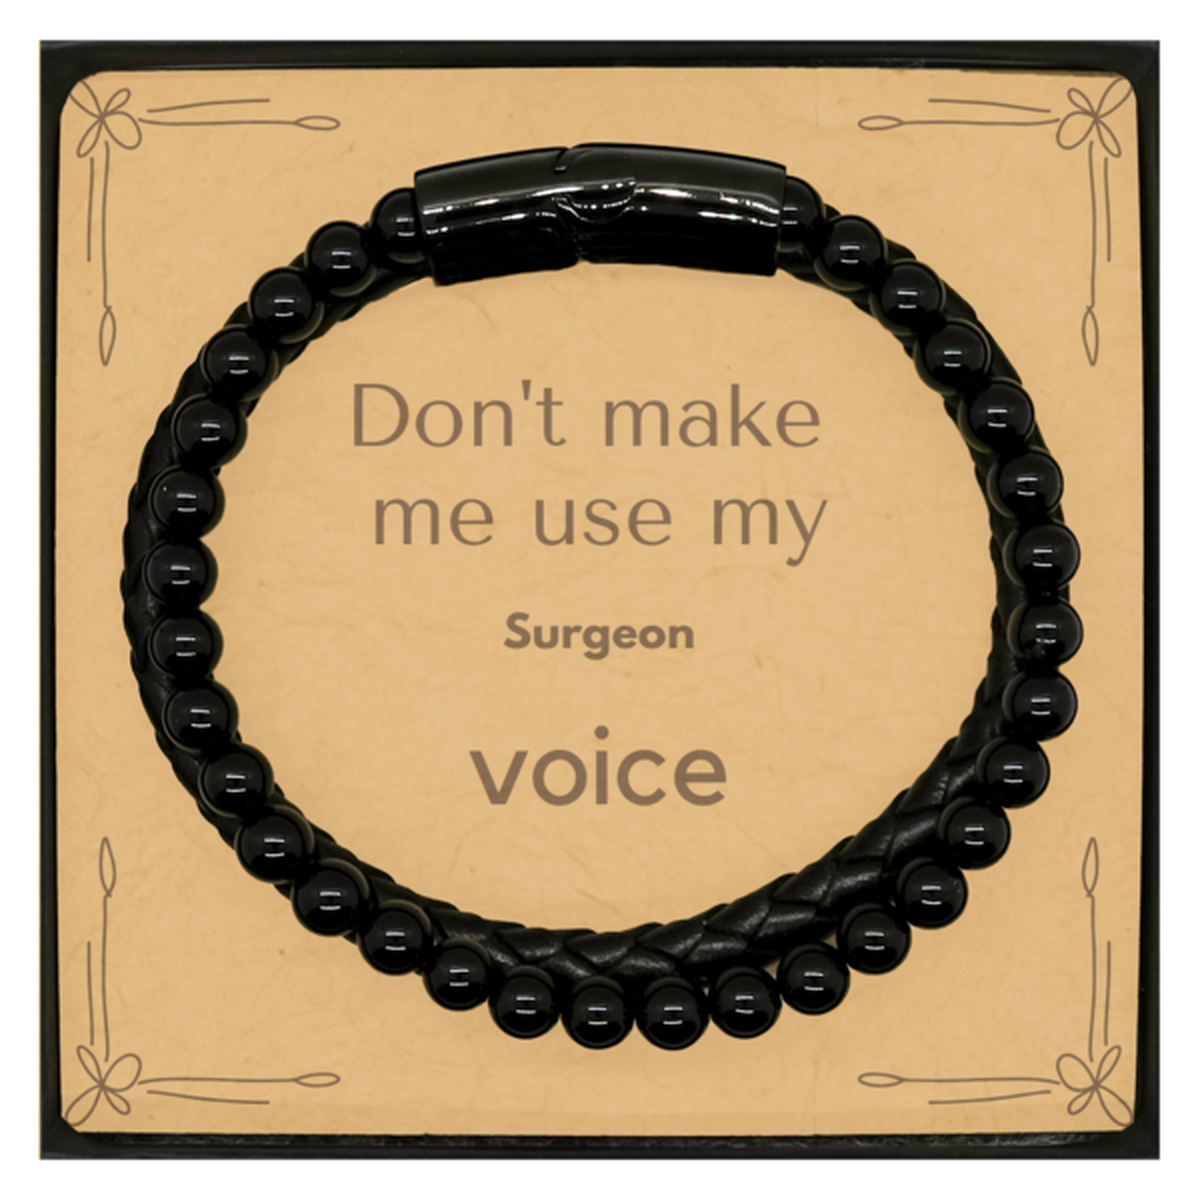 Don't make me use my Surgeon voice, Sarcasm Surgeon Card Gifts, Christmas Surgeon Stone Leather Bracelets Birthday Unique Gifts For Surgeon Coworkers, Men, Women, Colleague, Friends